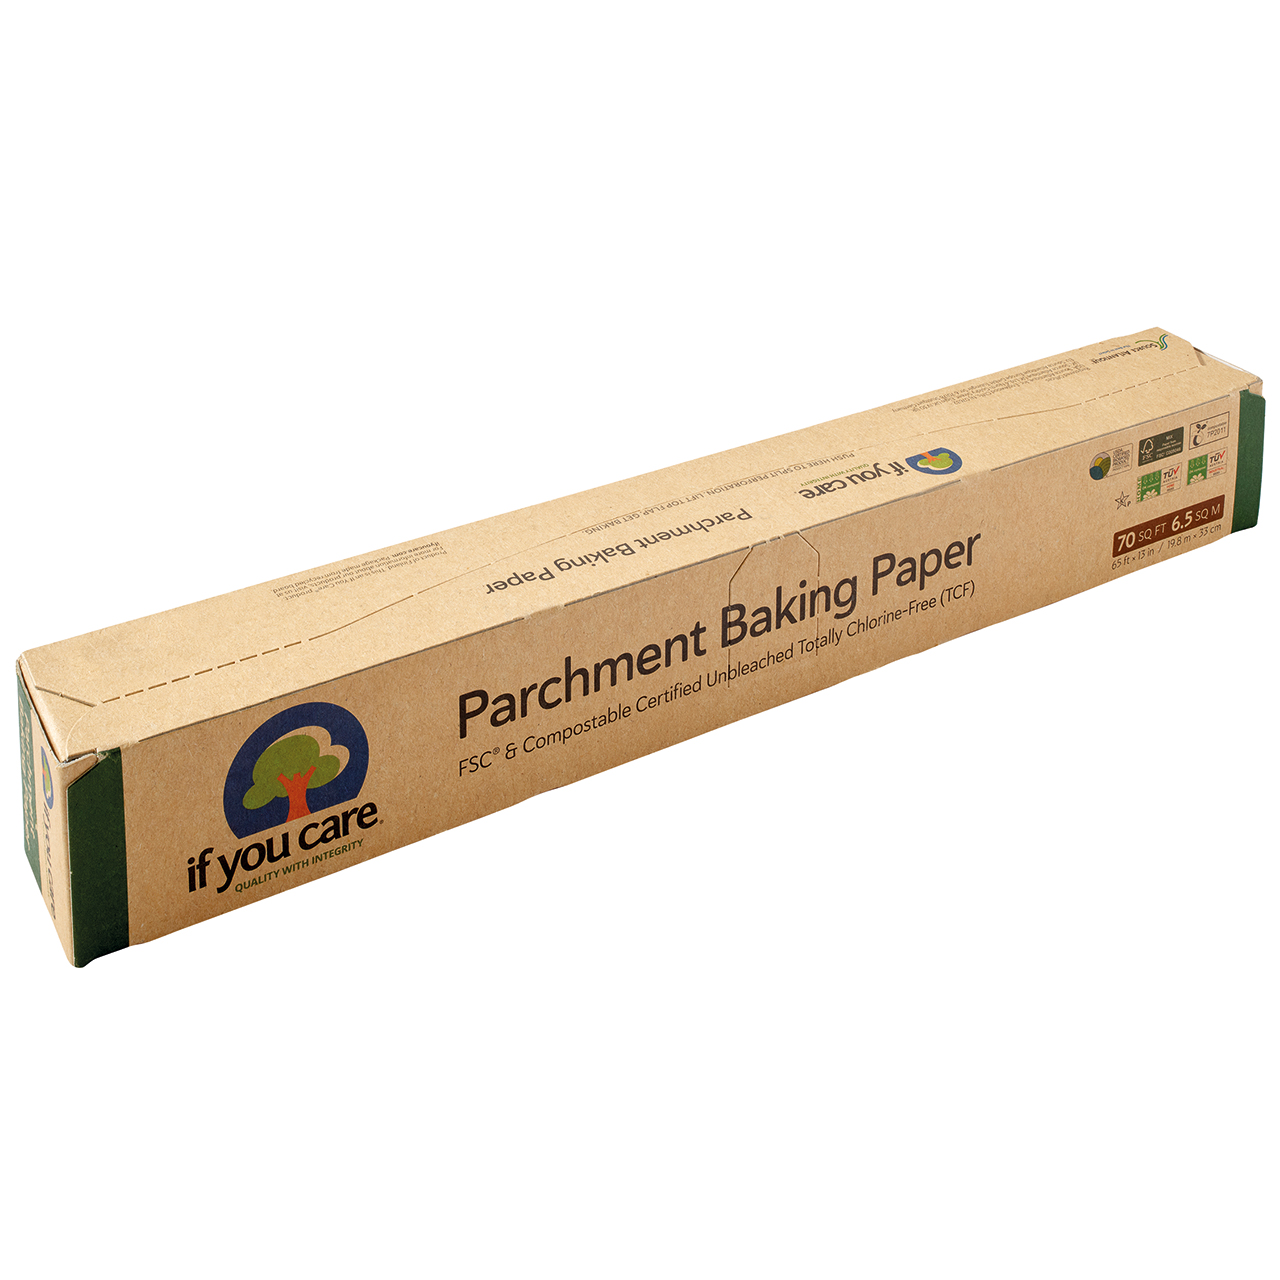 Parchment Baking Paper - Pack of 2